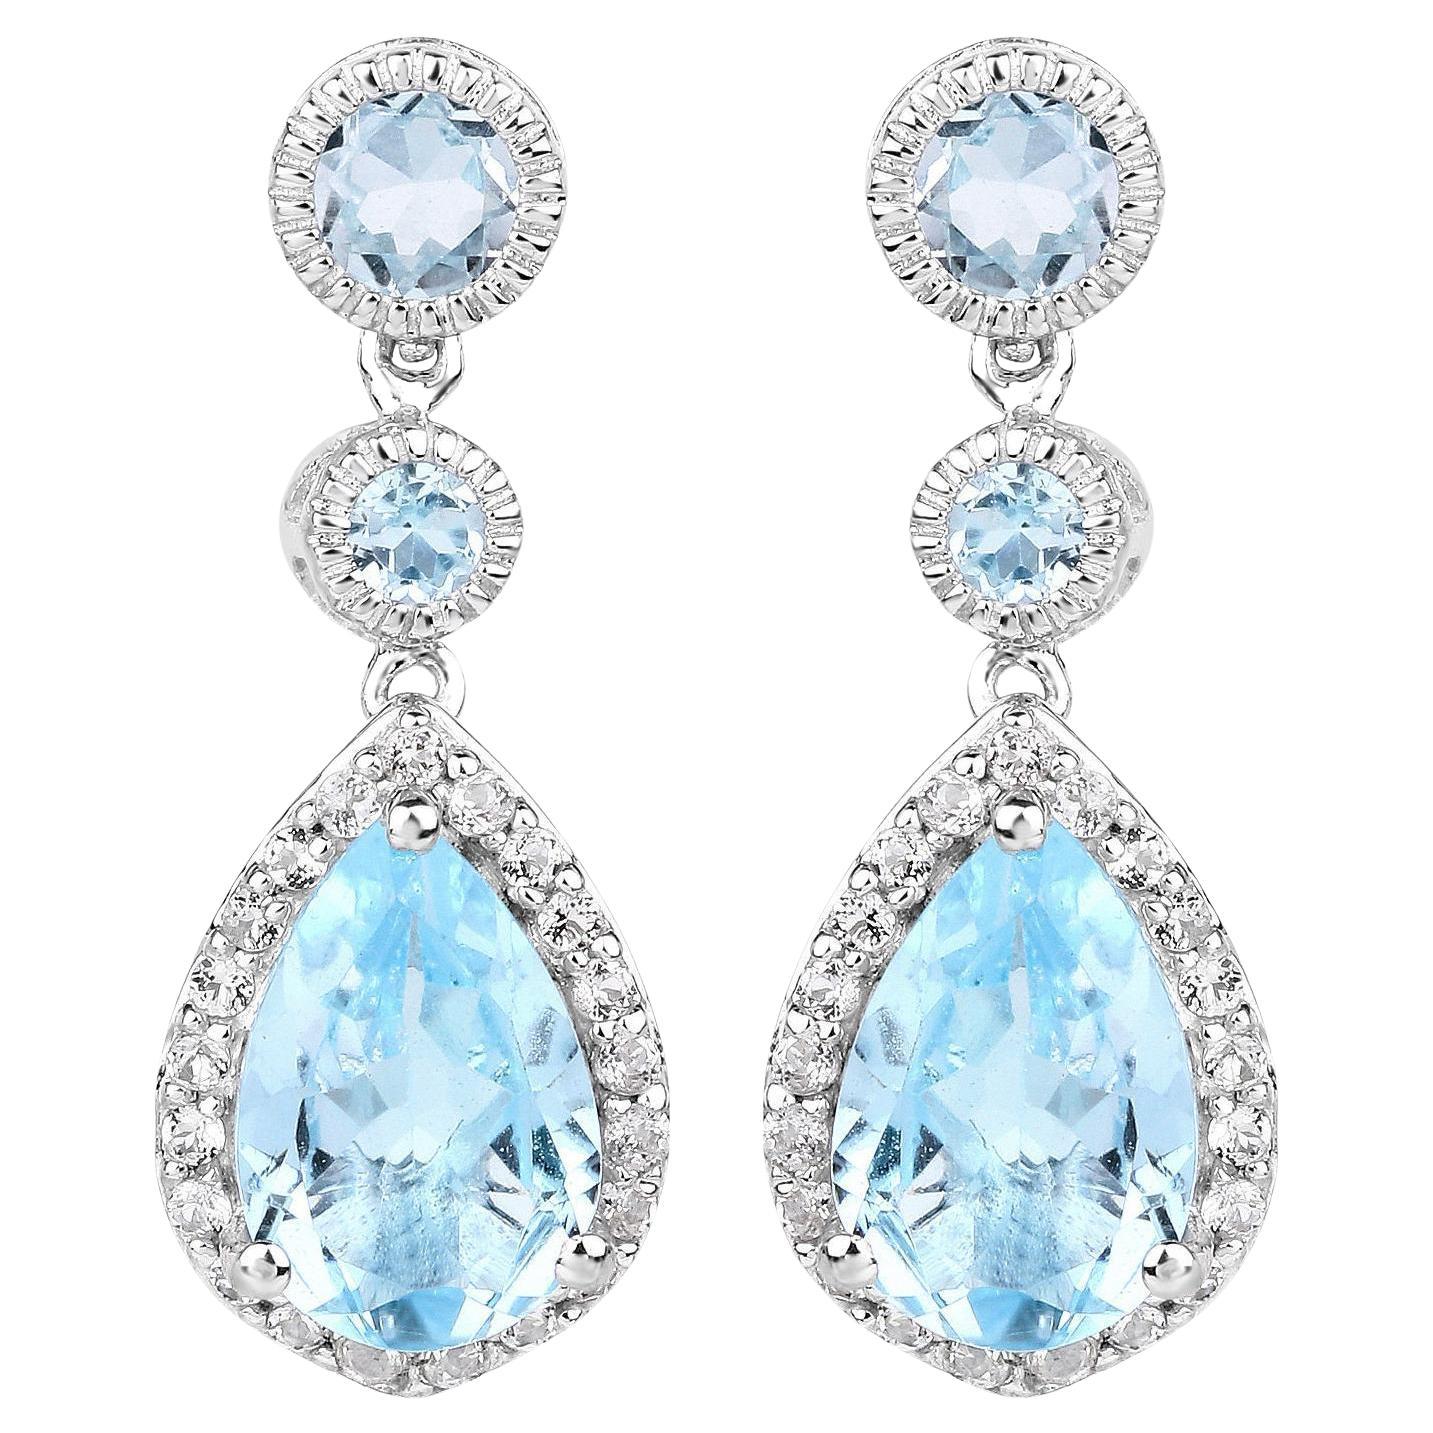 Contemporary Swiss Blue Topaz Dangle Earrings With White Topaz 9.46 Carats